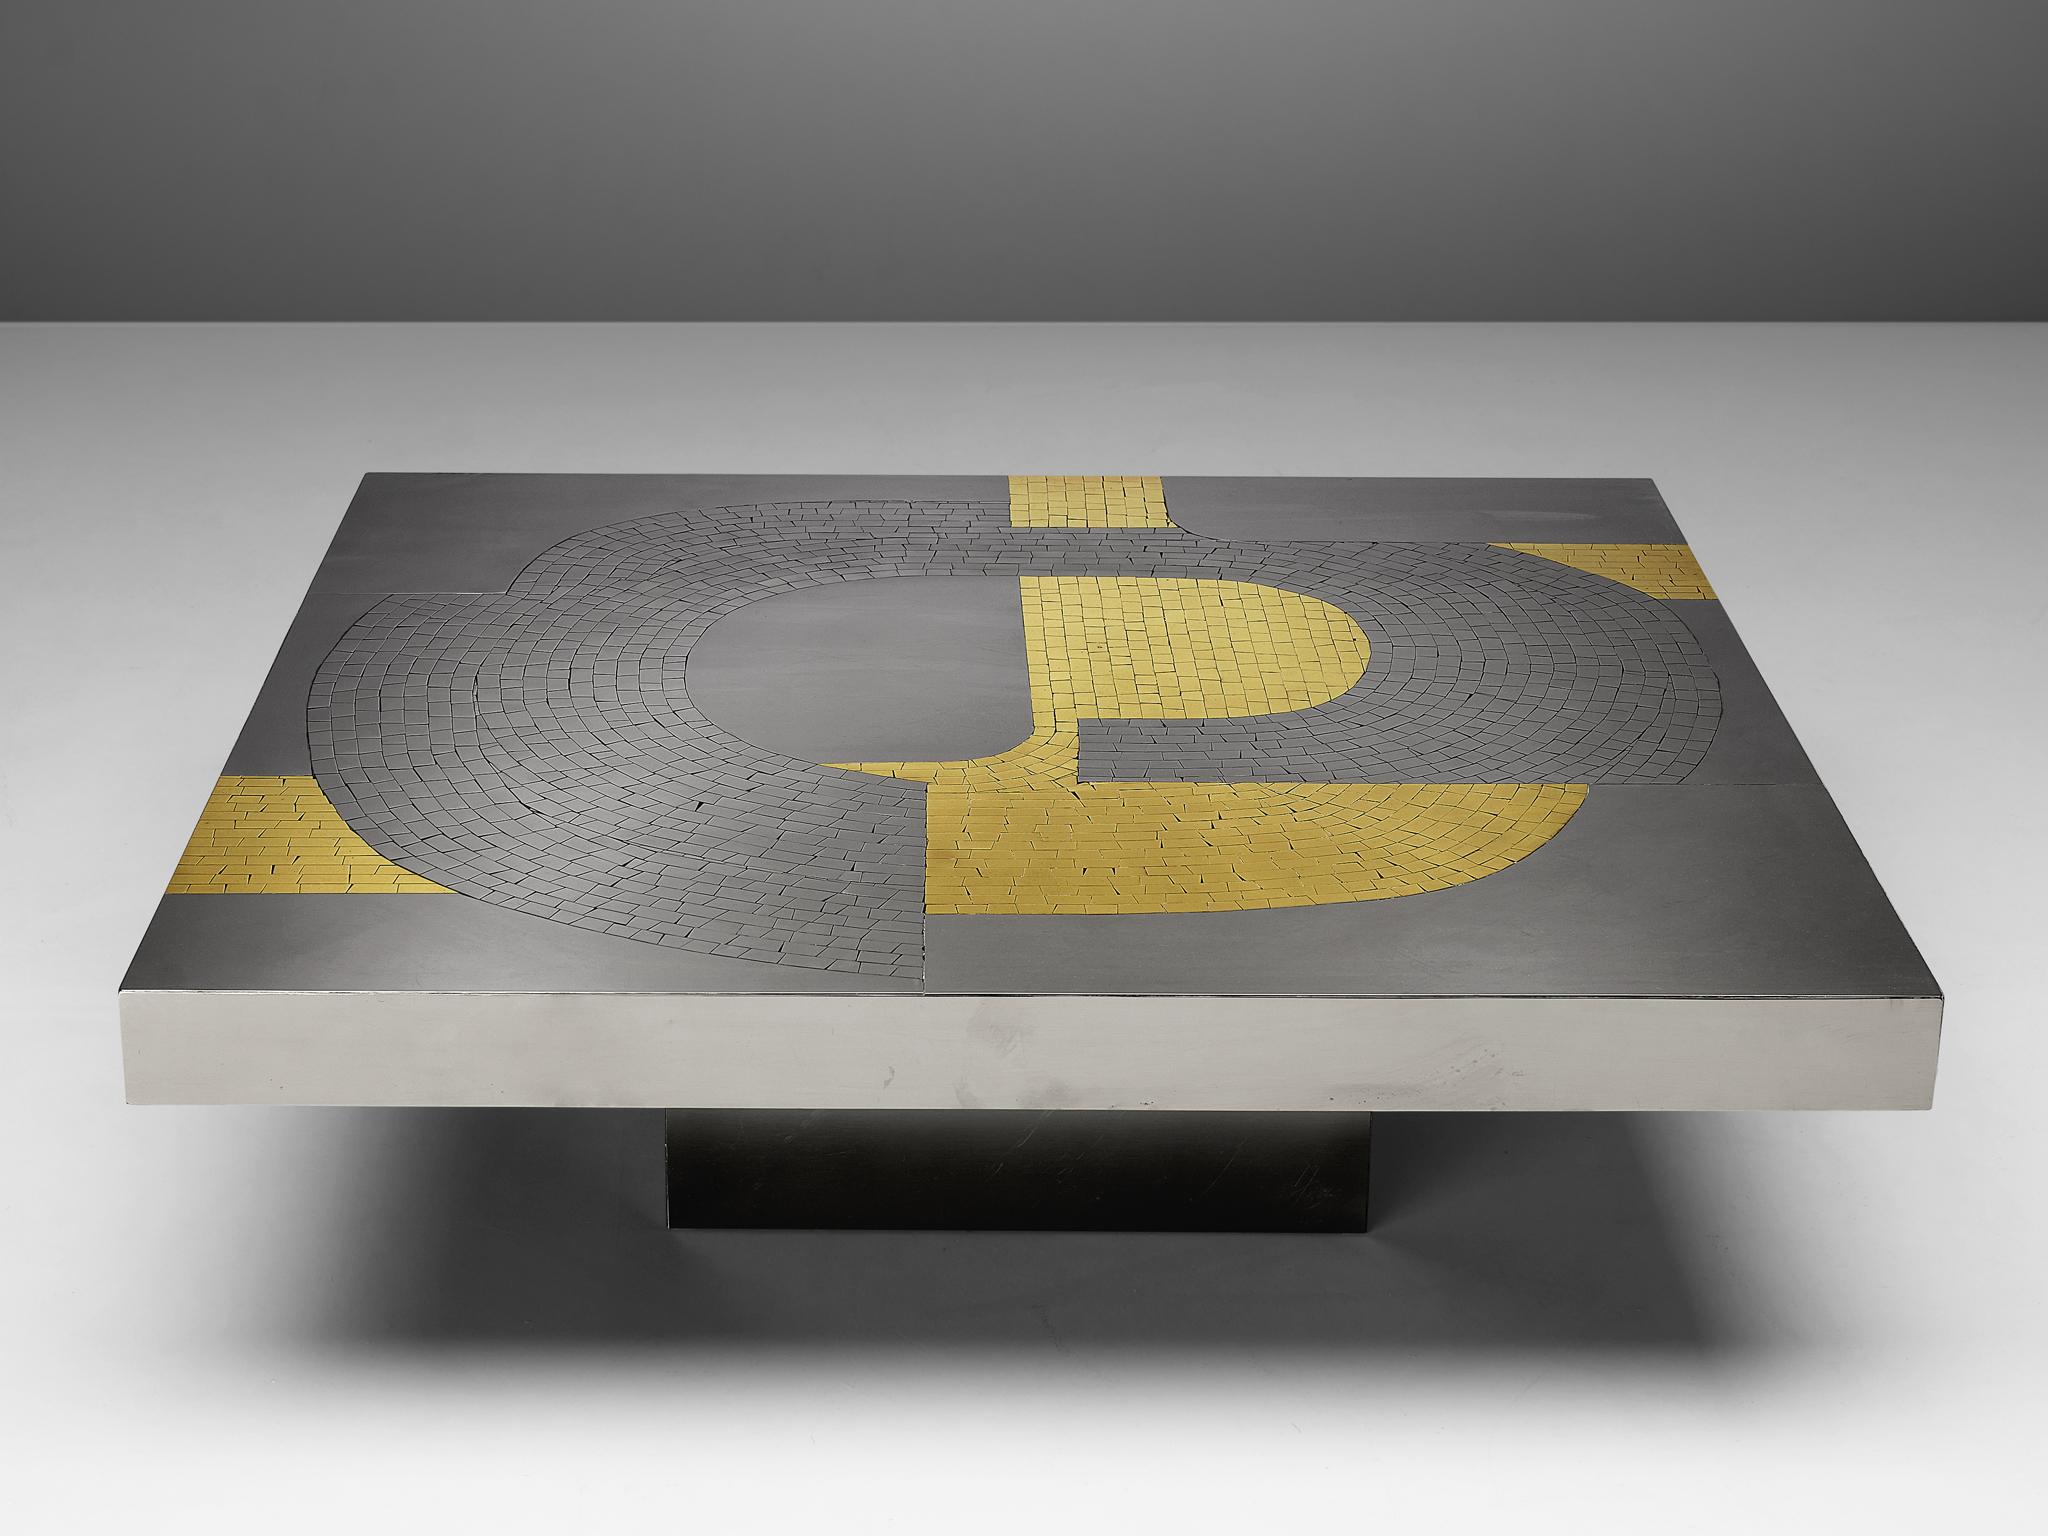 Jean Claude Dresse, coffee table, brushed stainless steel and brass, Belgium, circa 1970

An extraordinary piece, crafted with great eye for proportions and detail, typical for the work of Dresse. The combination of materials such as steel and